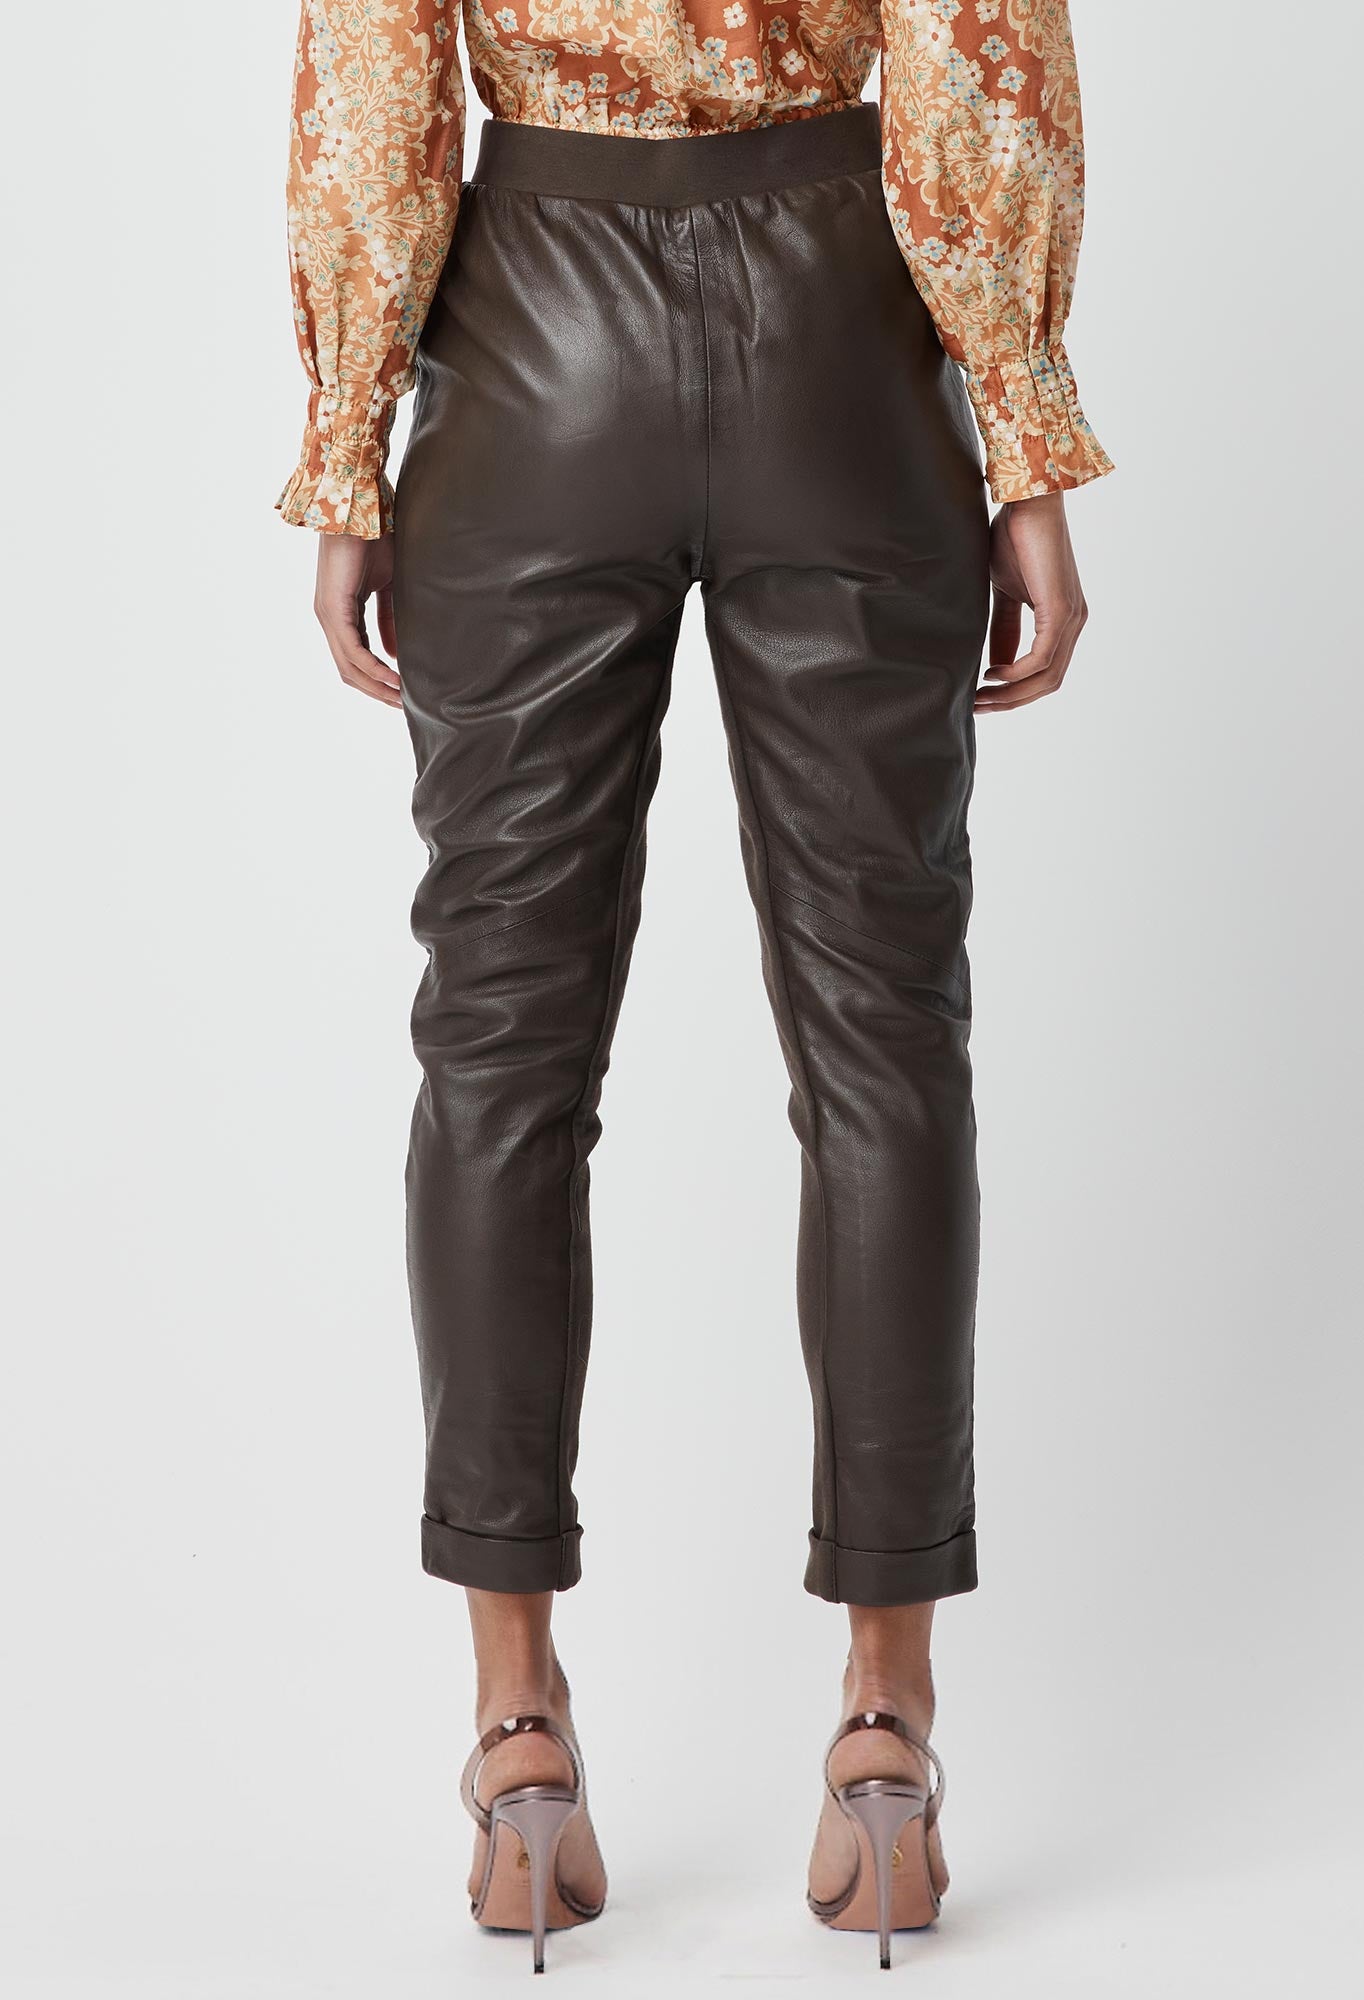 Hemingway Leather Pant in Chocolate